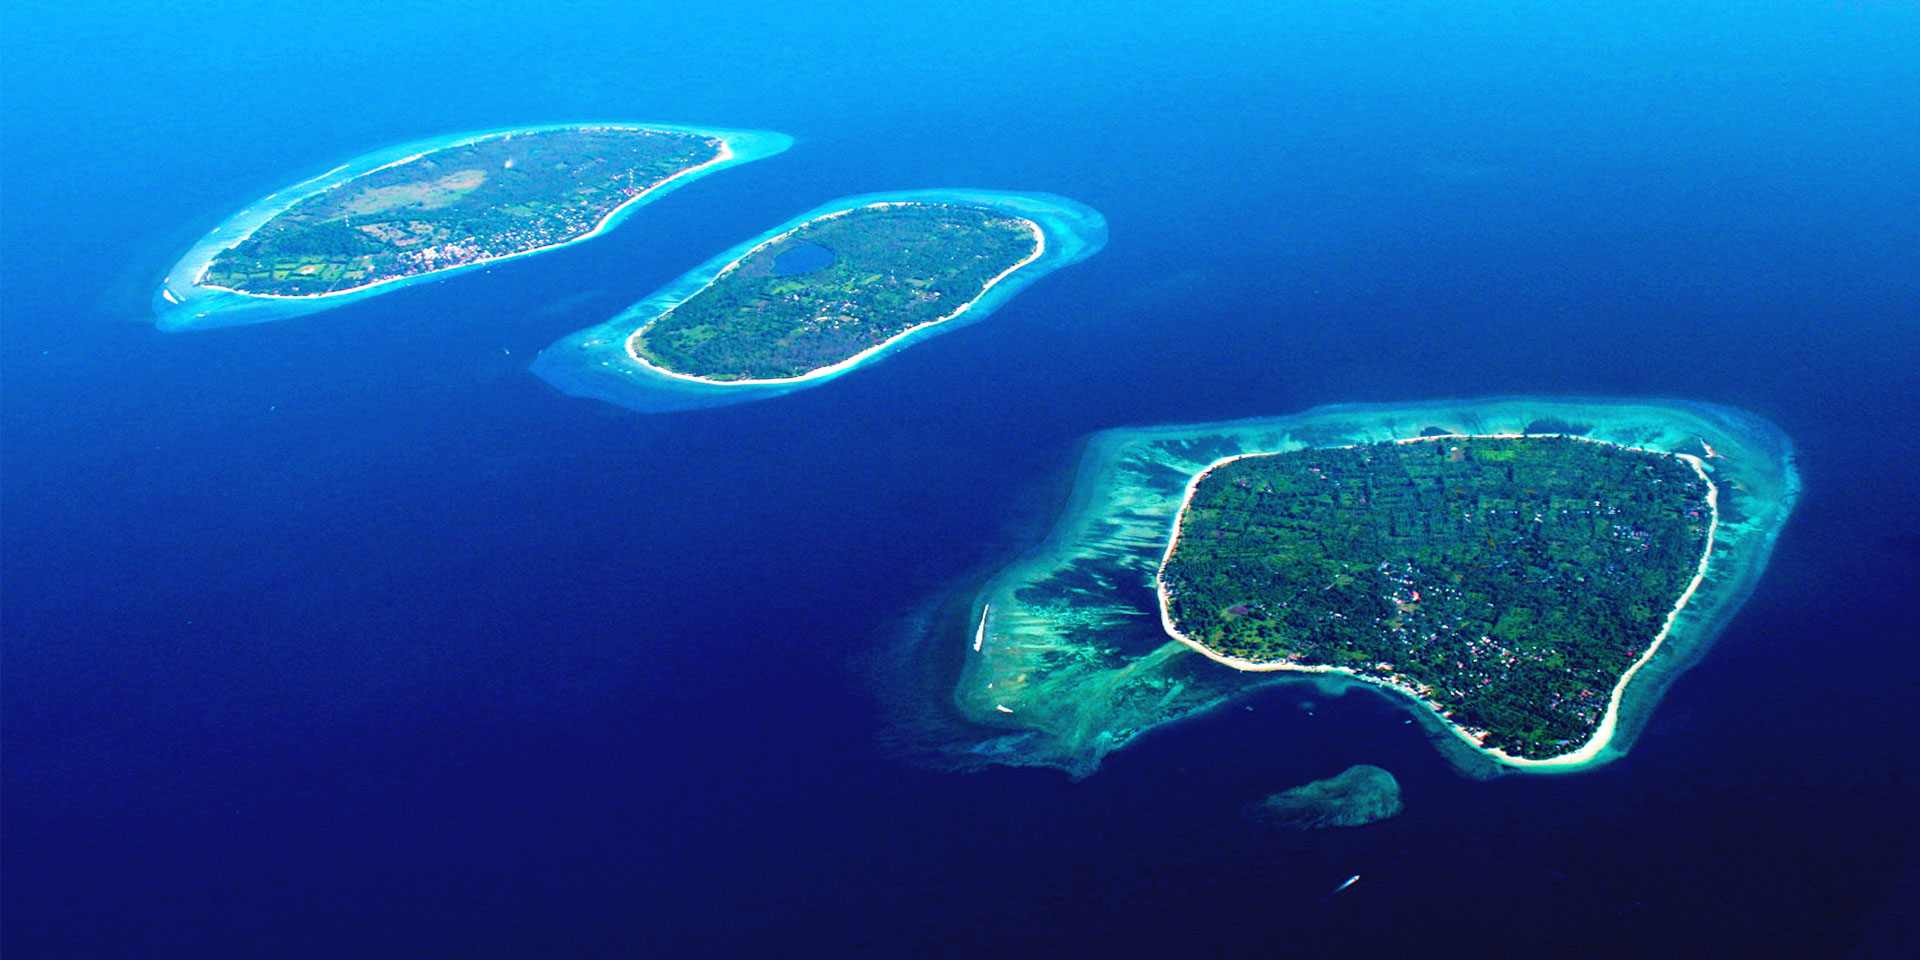 Gili Islands is one of the most beautiful tourist places in Lombok, Indonesia